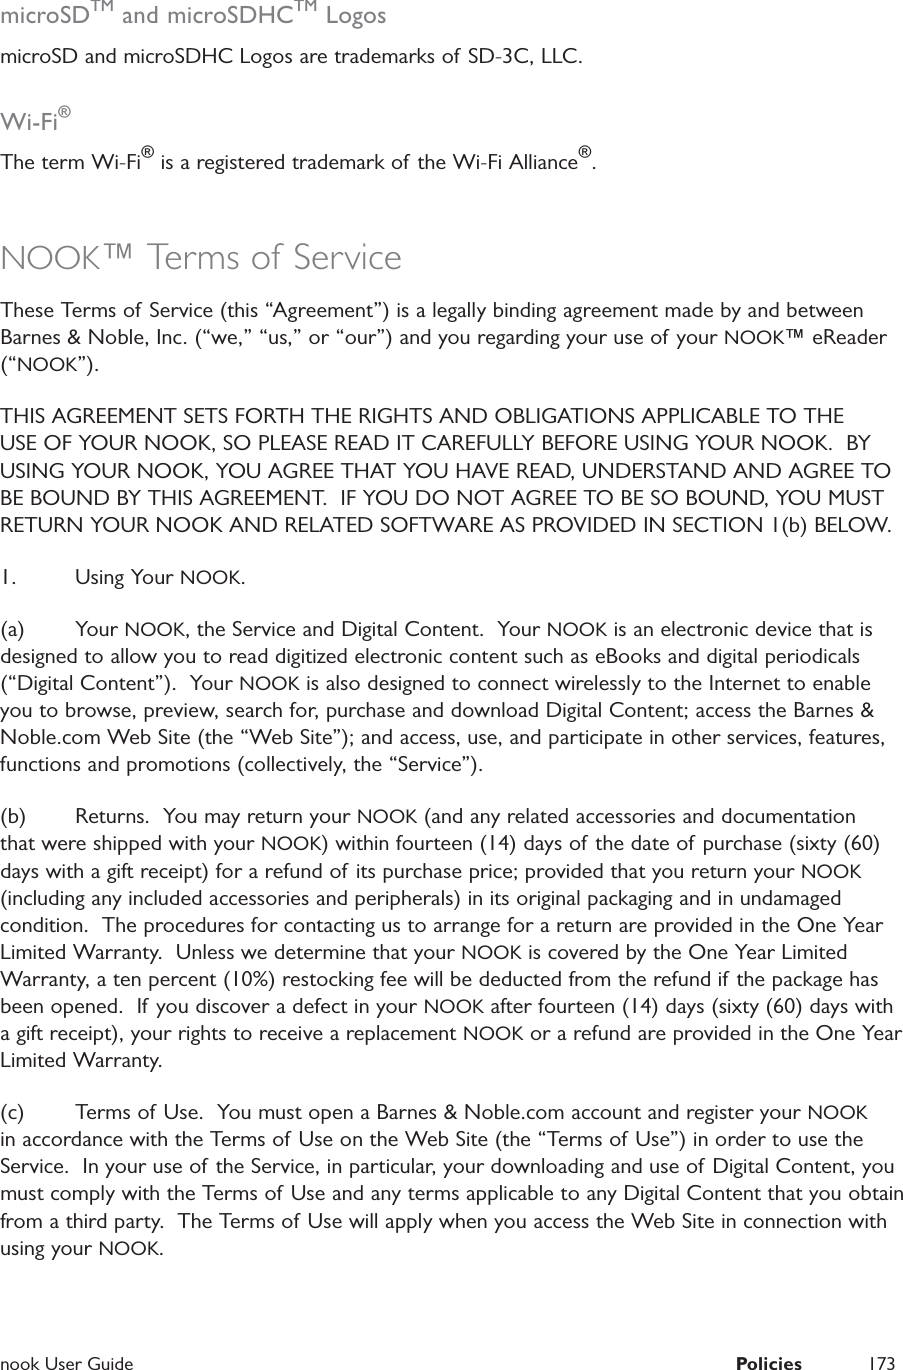  nook User Guide  Policies 173microSDTM and microSDHCTM LogosmicroSD and microSDHC Logos are trademarks of SD-3C, LLC.Wi-Fi®The term Wi-Fi® is a registered trademark of the Wi-Fi Alliance®.NOOK™ Terms of ServiceThese Terms of Service (this “Agreement”) is a legally binding agreement made by and between Barnes &amp; Noble, Inc. (“we,” “us,” or “our”) and you regarding your use of your NOOK™ eReader (“NOOK”).  THIS AGREEMENT SETS FORTH THE RIGHTS AND OBLIGATIONS APPLICABLE TO THE USE OF YOUR NOOK, SO PLEASE READ IT CAREFULLY BEFORE USING YOUR NOOK.  BY USING YOUR NOOK, YOU AGREE THAT YOU HAVE READ, UNDERSTAND AND AGREE TO BE BOUND BY THIS AGREEMENT.  IF YOU DO NOT AGREE TO BE SO BOUND, YOU MUST RETURN YOUR NOOK AND RELATED SOFTWARE AS PROVIDED IN SECTION 1(b) BELOW.1. Using Your NOOK.(a) Your NOOK, the Service and Digital Content.  Your NOOK is an electronic device that is designed to allow you to read digitized electronic content such as eBooks and digital periodicals (“Digital Content”).  Your NOOK is also designed to connect wirelessly to the Internet to enable you to browse, preview, search for, purchase and download Digital Content; access the Barnes &amp; Noble.com Web Site (the “Web Site”); and access, use, and participate in other services, features, functions and promotions (collectively, the “Service”).  (b)  Returns.  You may return your NOOK (and any related accessories and documentation that were shipped with your NOOK) within fourteen (14) days of the date of purchase (sixty (60) days with a gift receipt) for a refund of its purchase price; provided that you return your NOOK (including any included accessories and peripherals) in its original packaging and in undamaged condition.  The procedures for contacting us to arrange for a return are provided in the One Year Limited Warranty.  Unless we determine that your NOOK is covered by the One Year Limited Warranty, a ten percent (10%) restocking fee will be deducted from the refund if  the package has been opened.  If you discover a defect in your NOOK after fourteen (14) days (sixty (60) days with a gift receipt), your rights to receive a replacement NOOK or a refund are provided in the One Year Limited Warranty.  (c)  Terms of Use.  You must open a Barnes &amp; Noble.com account and register your NOOK in accordance with the Terms of Use on the Web Site (the “Terms of Use”) in order to use the Service.  In your use of the Service, in particular, your downloading and use of Digital Content, you must comply with the Terms of Use and any terms applicable to any Digital Content that you obtain from a third party.  The Terms of Use will apply when you access the Web Site in connection with using your NOOK.  